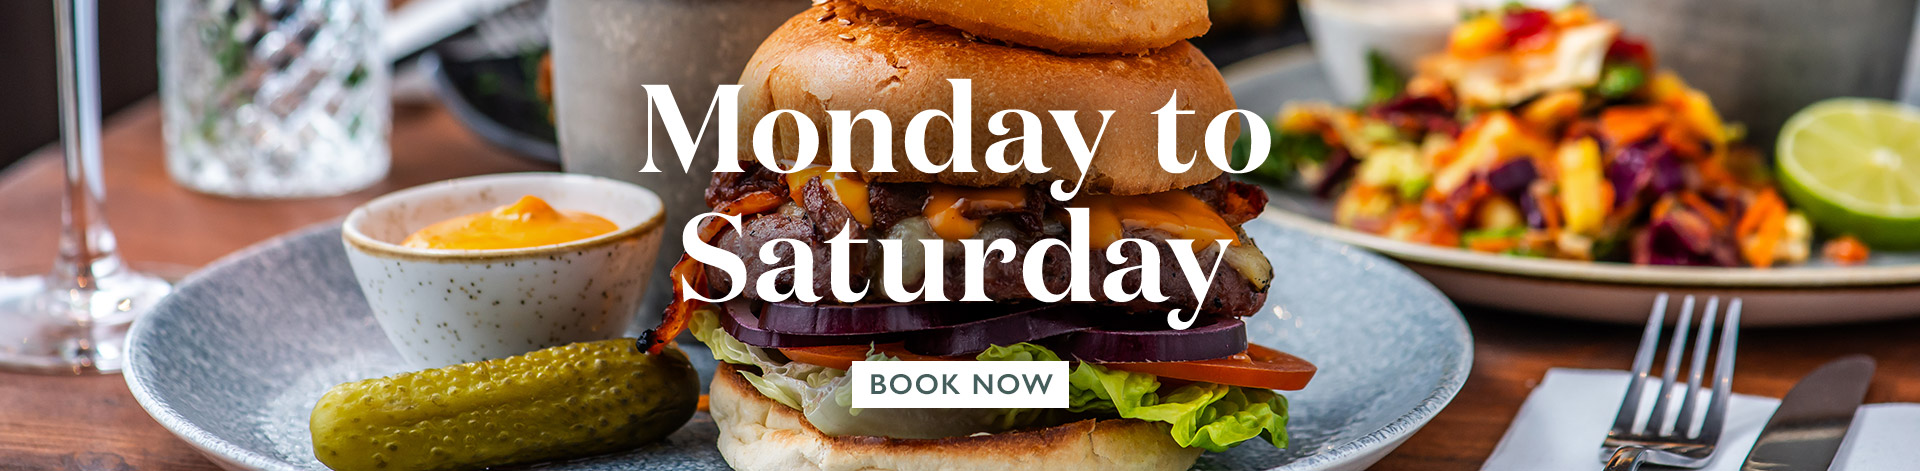 Book now at The Red Kite